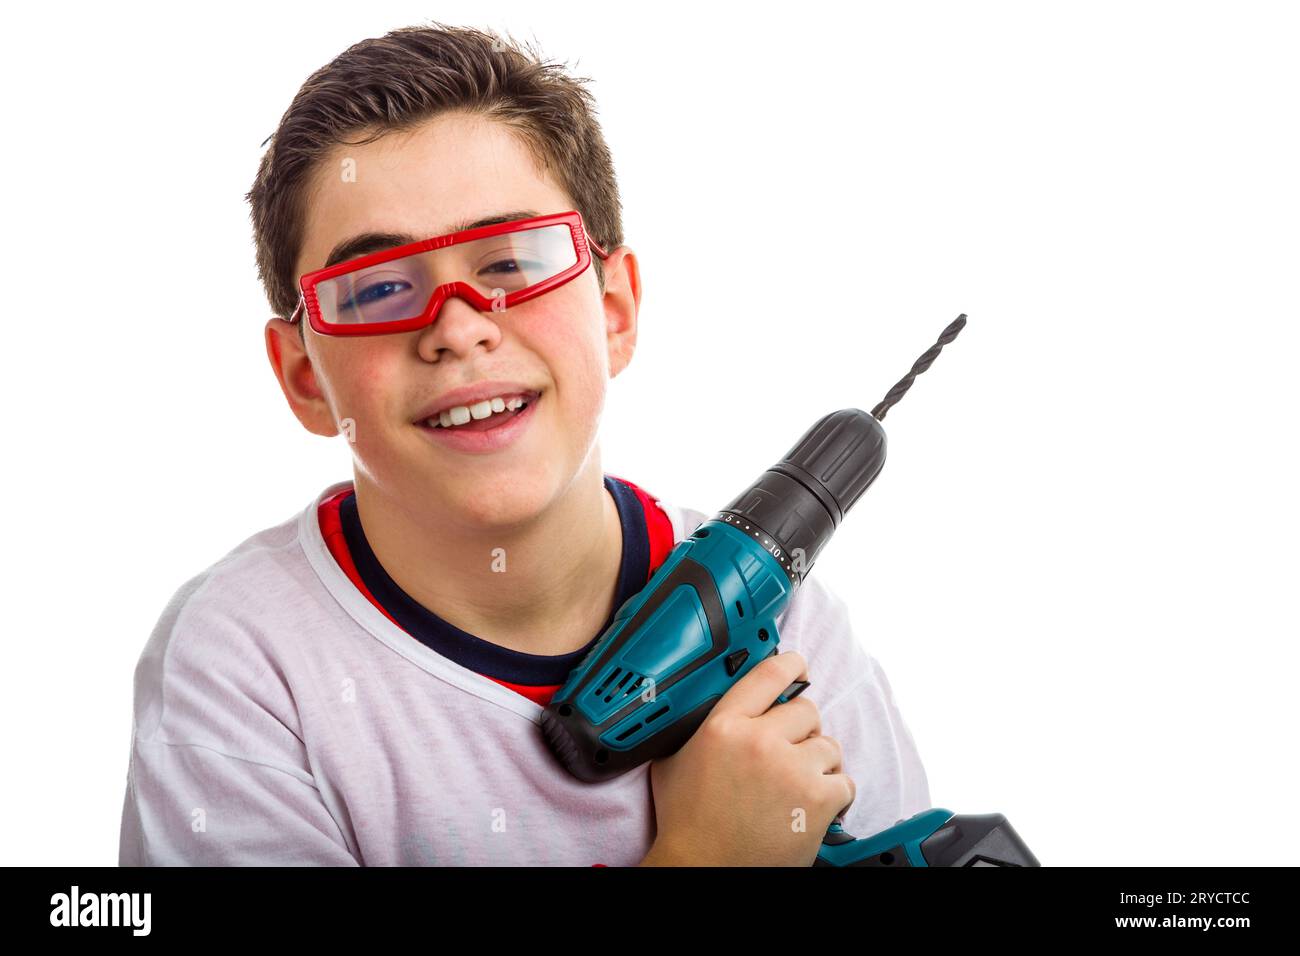 Child wearing red goggles and holding a cordless drill Stock Photo